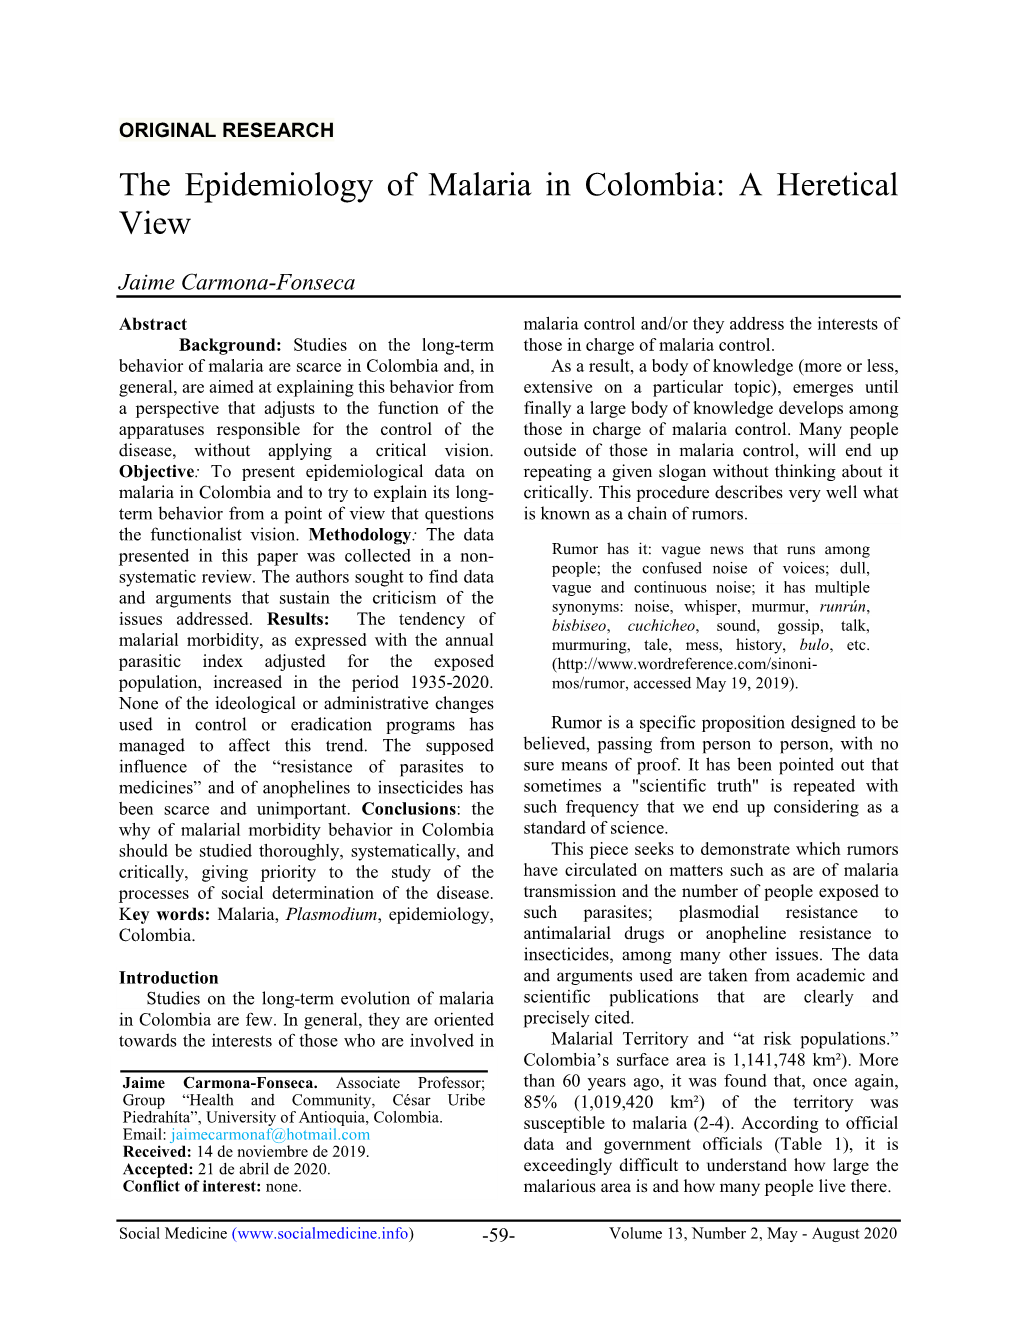 The Epidemiology of Malaria in Colombia: a Heretical View